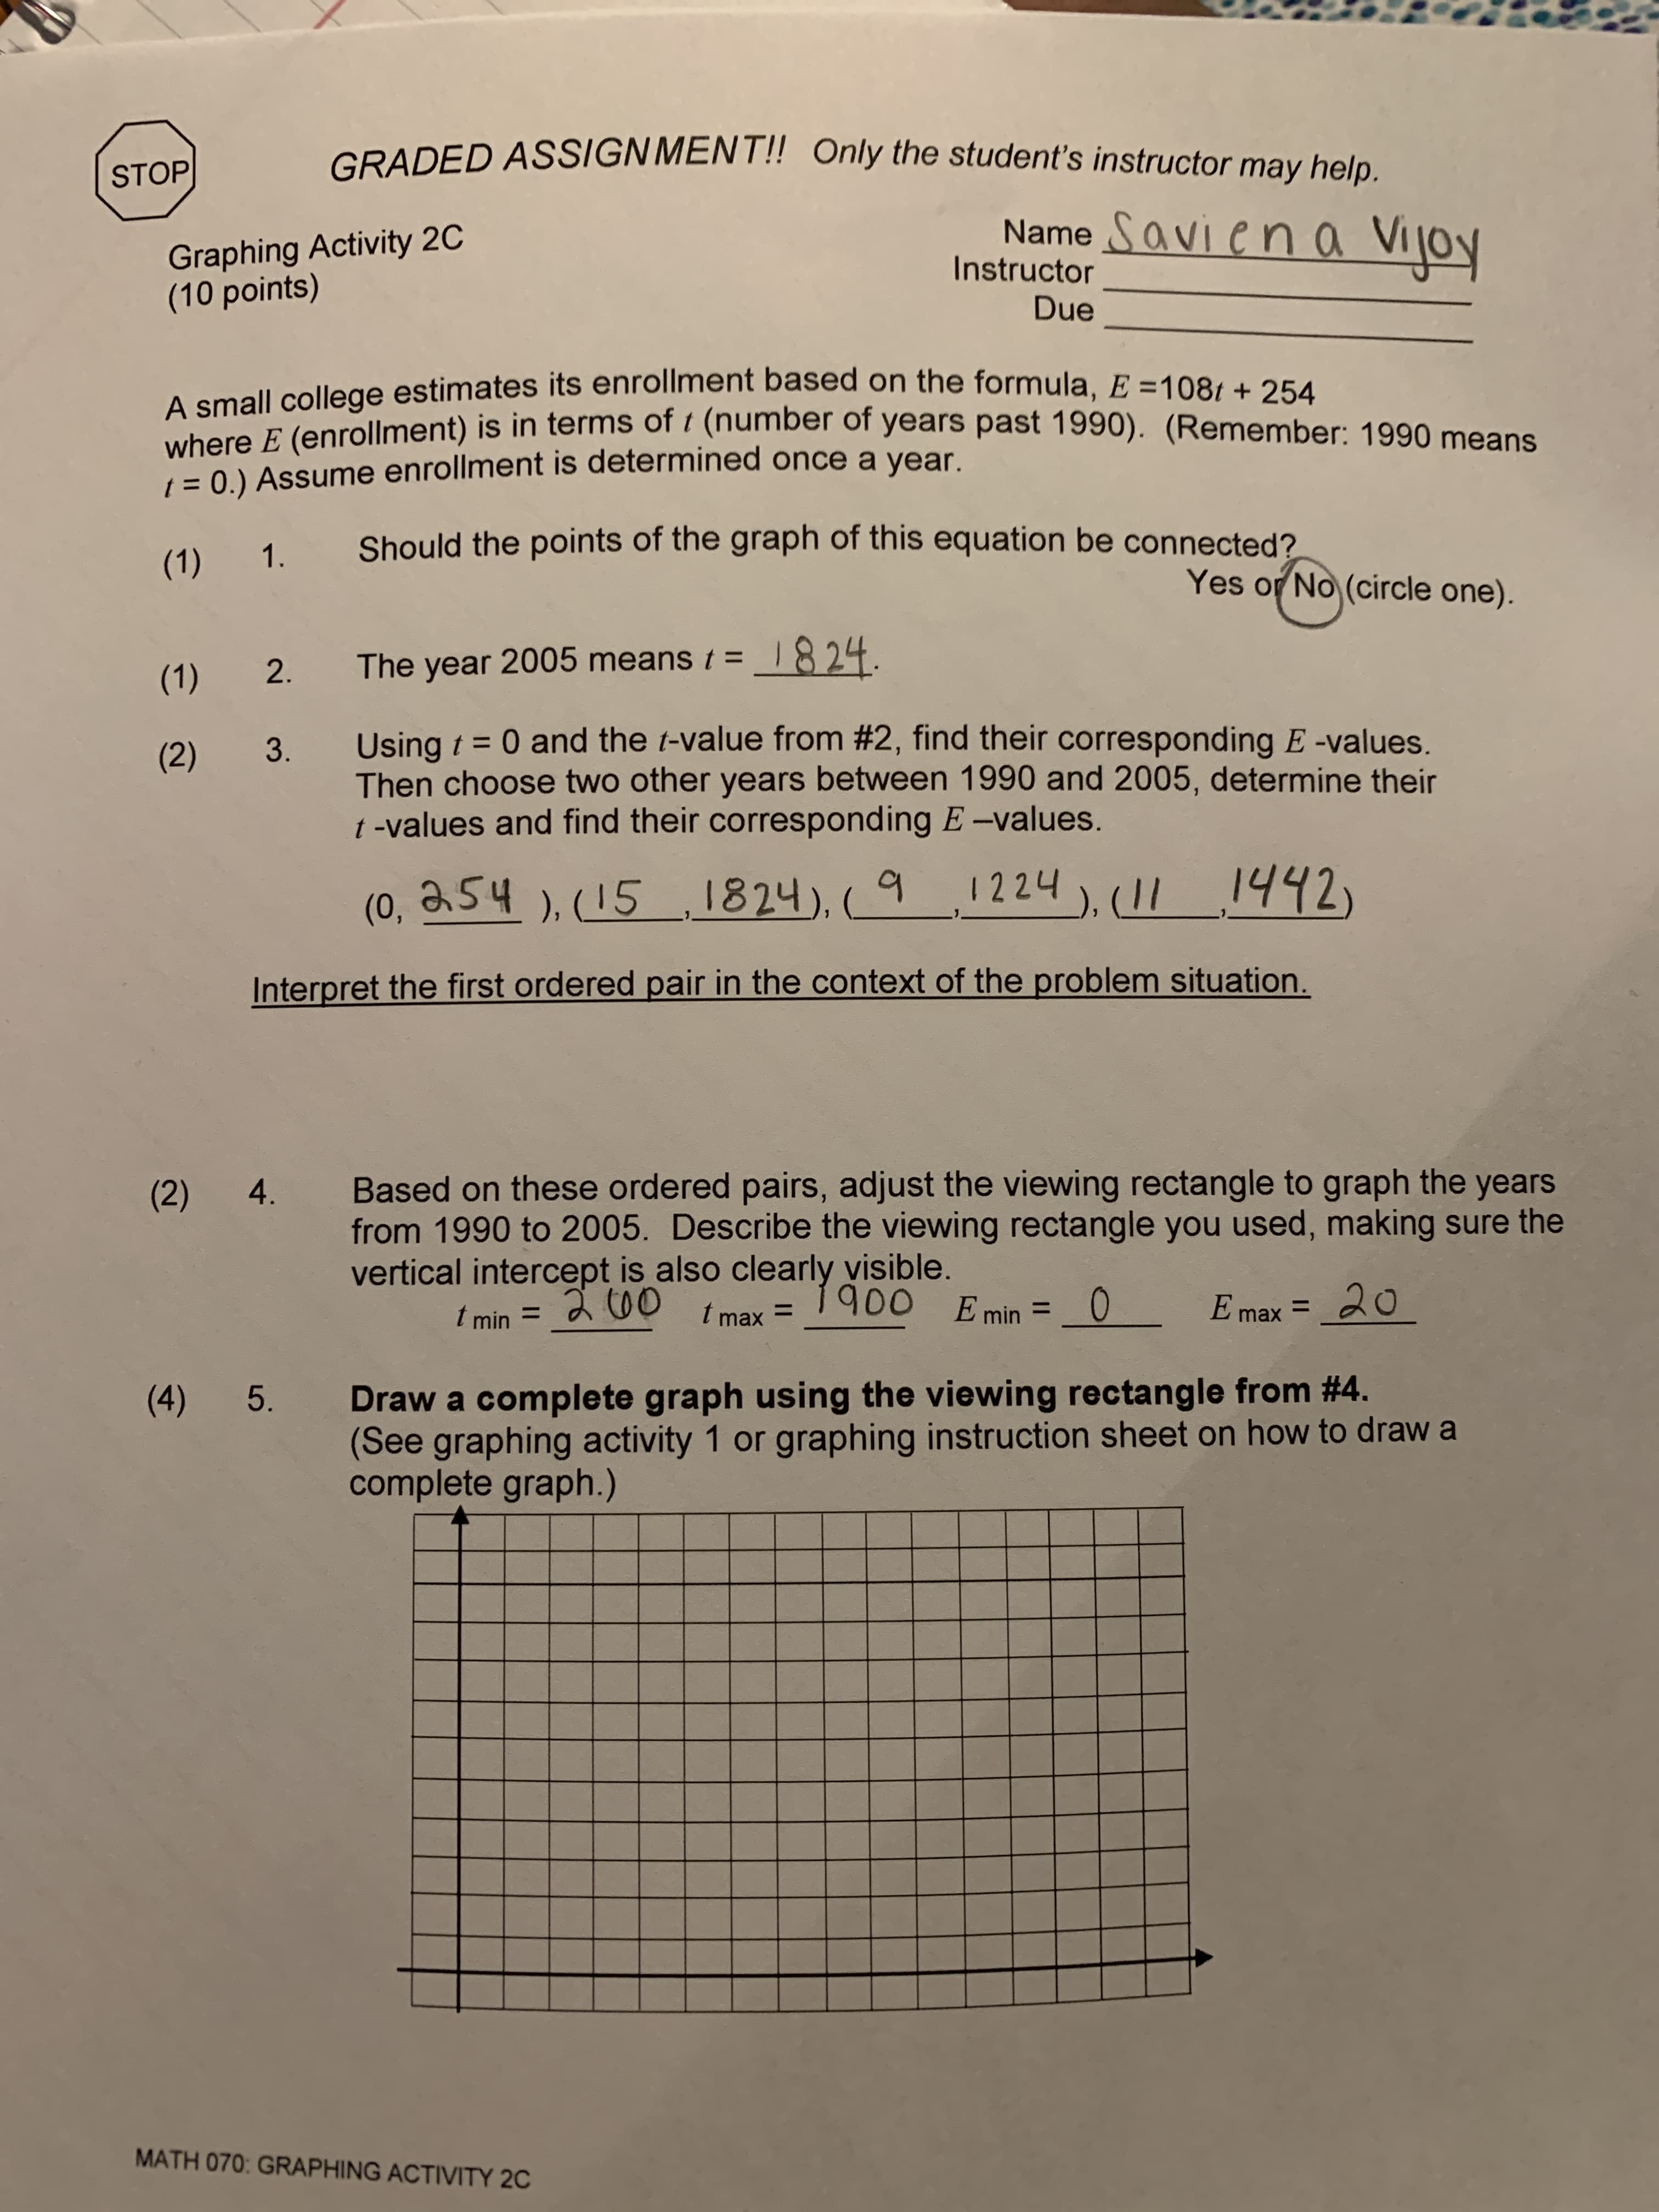 GRADED ASSIGNMENT!! Only the student's instructor may help.
STOP
Name Savien a Vijoy
Graphing Activity 2C
(10 points)
Instructor
Due
A small college estimates its enrollment based on the formula, E =108/ + 254
where E (enrollment) is in terms of i (number of years past 1990). (Remember: 1990 means
( = 0.) Assume enrollment is determined once a year.
Should the points of the graph of this equation be connected?
(1) 1.
Yes or No (circle one).
2.
The year 2005 means t =
1824.
(1)
Using t = 0 and the t-value from #2, find their corresponding E -values.
Then choose two other years between 1990 and 2005, determine their
1 -values and find their corresponding E-values.
(2)
(0, a54 ), (151824), (_9
1224
), (II_1442)
Interpret the first ordered pair in the context of the problem situation.
Based on these ordered pairs, adjust the viewing rectangle to graph the years
from 1990 to 2005. Describe the viewing rectangle you used, making sure the
vertical intercept is also clearly visible.
(2) 4.
ang00 Emin
20
2c00 tmax
E max =
%3D
t min =
%3D
Draw a complete graph using the viewing rectangle from #4.
(See graphing activity 1 or graphing instruction sheet on how to draw a
complete graph.)
(4) 5.
MATH 070: GRAPHING ACTIVITY 2C
3.
